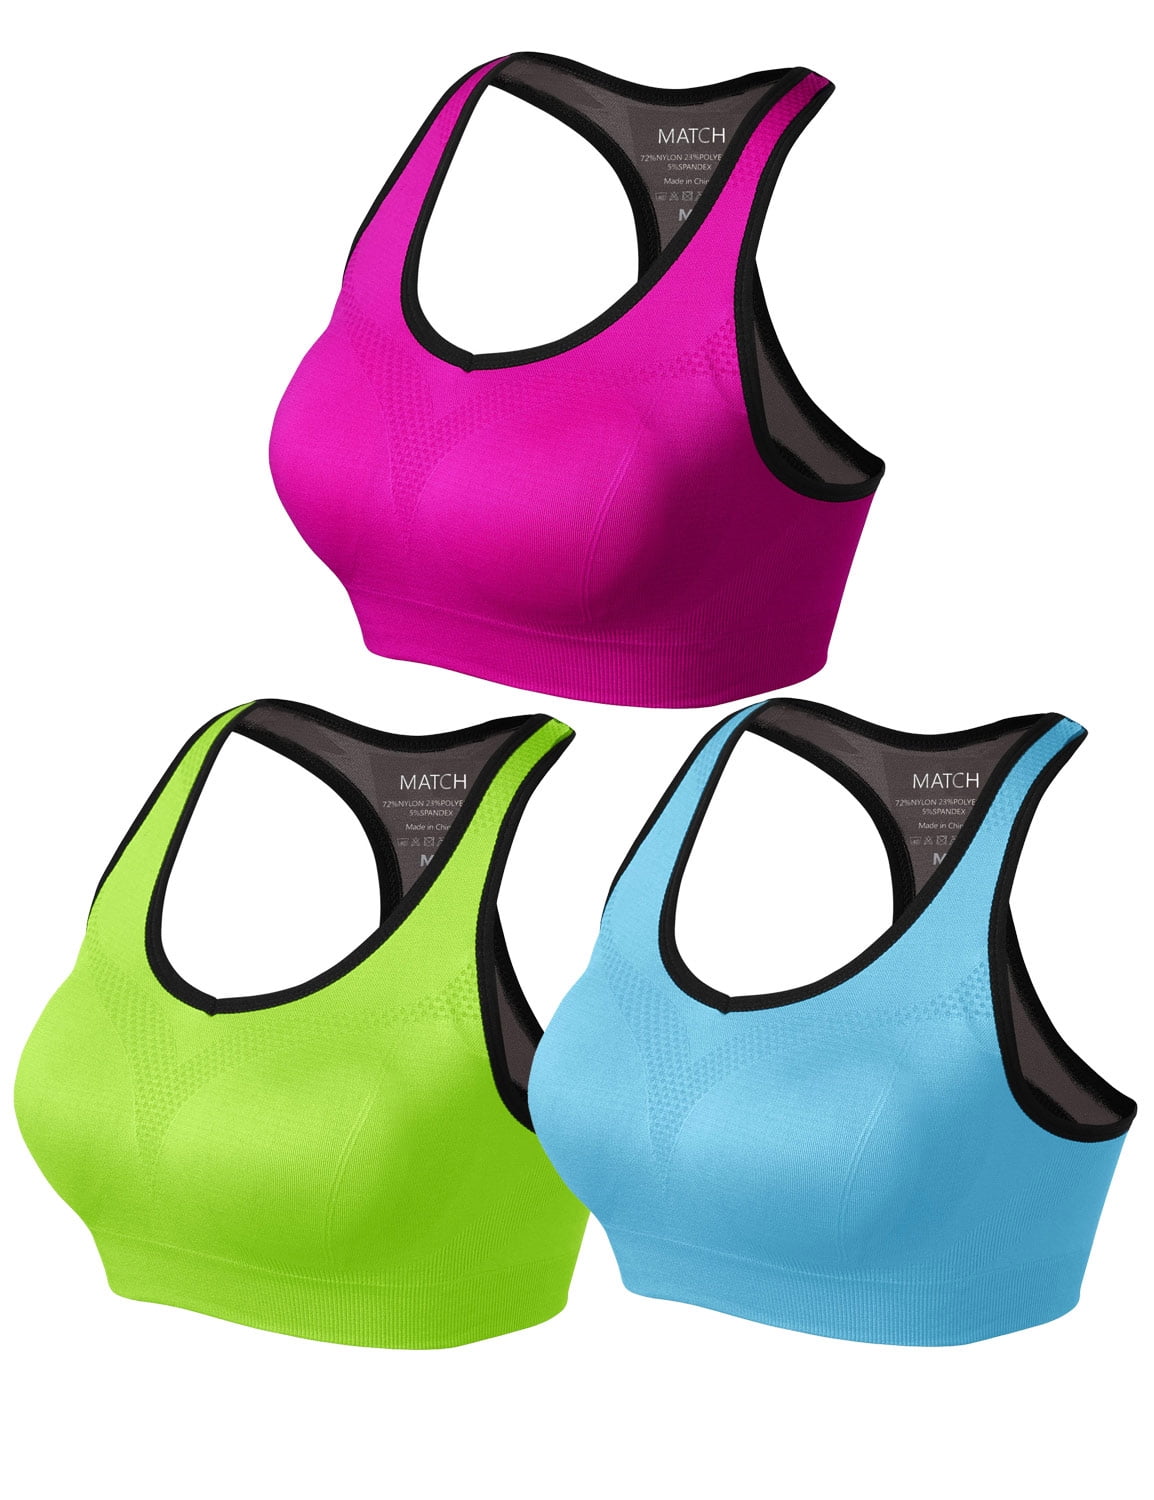 Matchstick Women's Wirefree Padded Racerback Sports Bra for Yoga ...